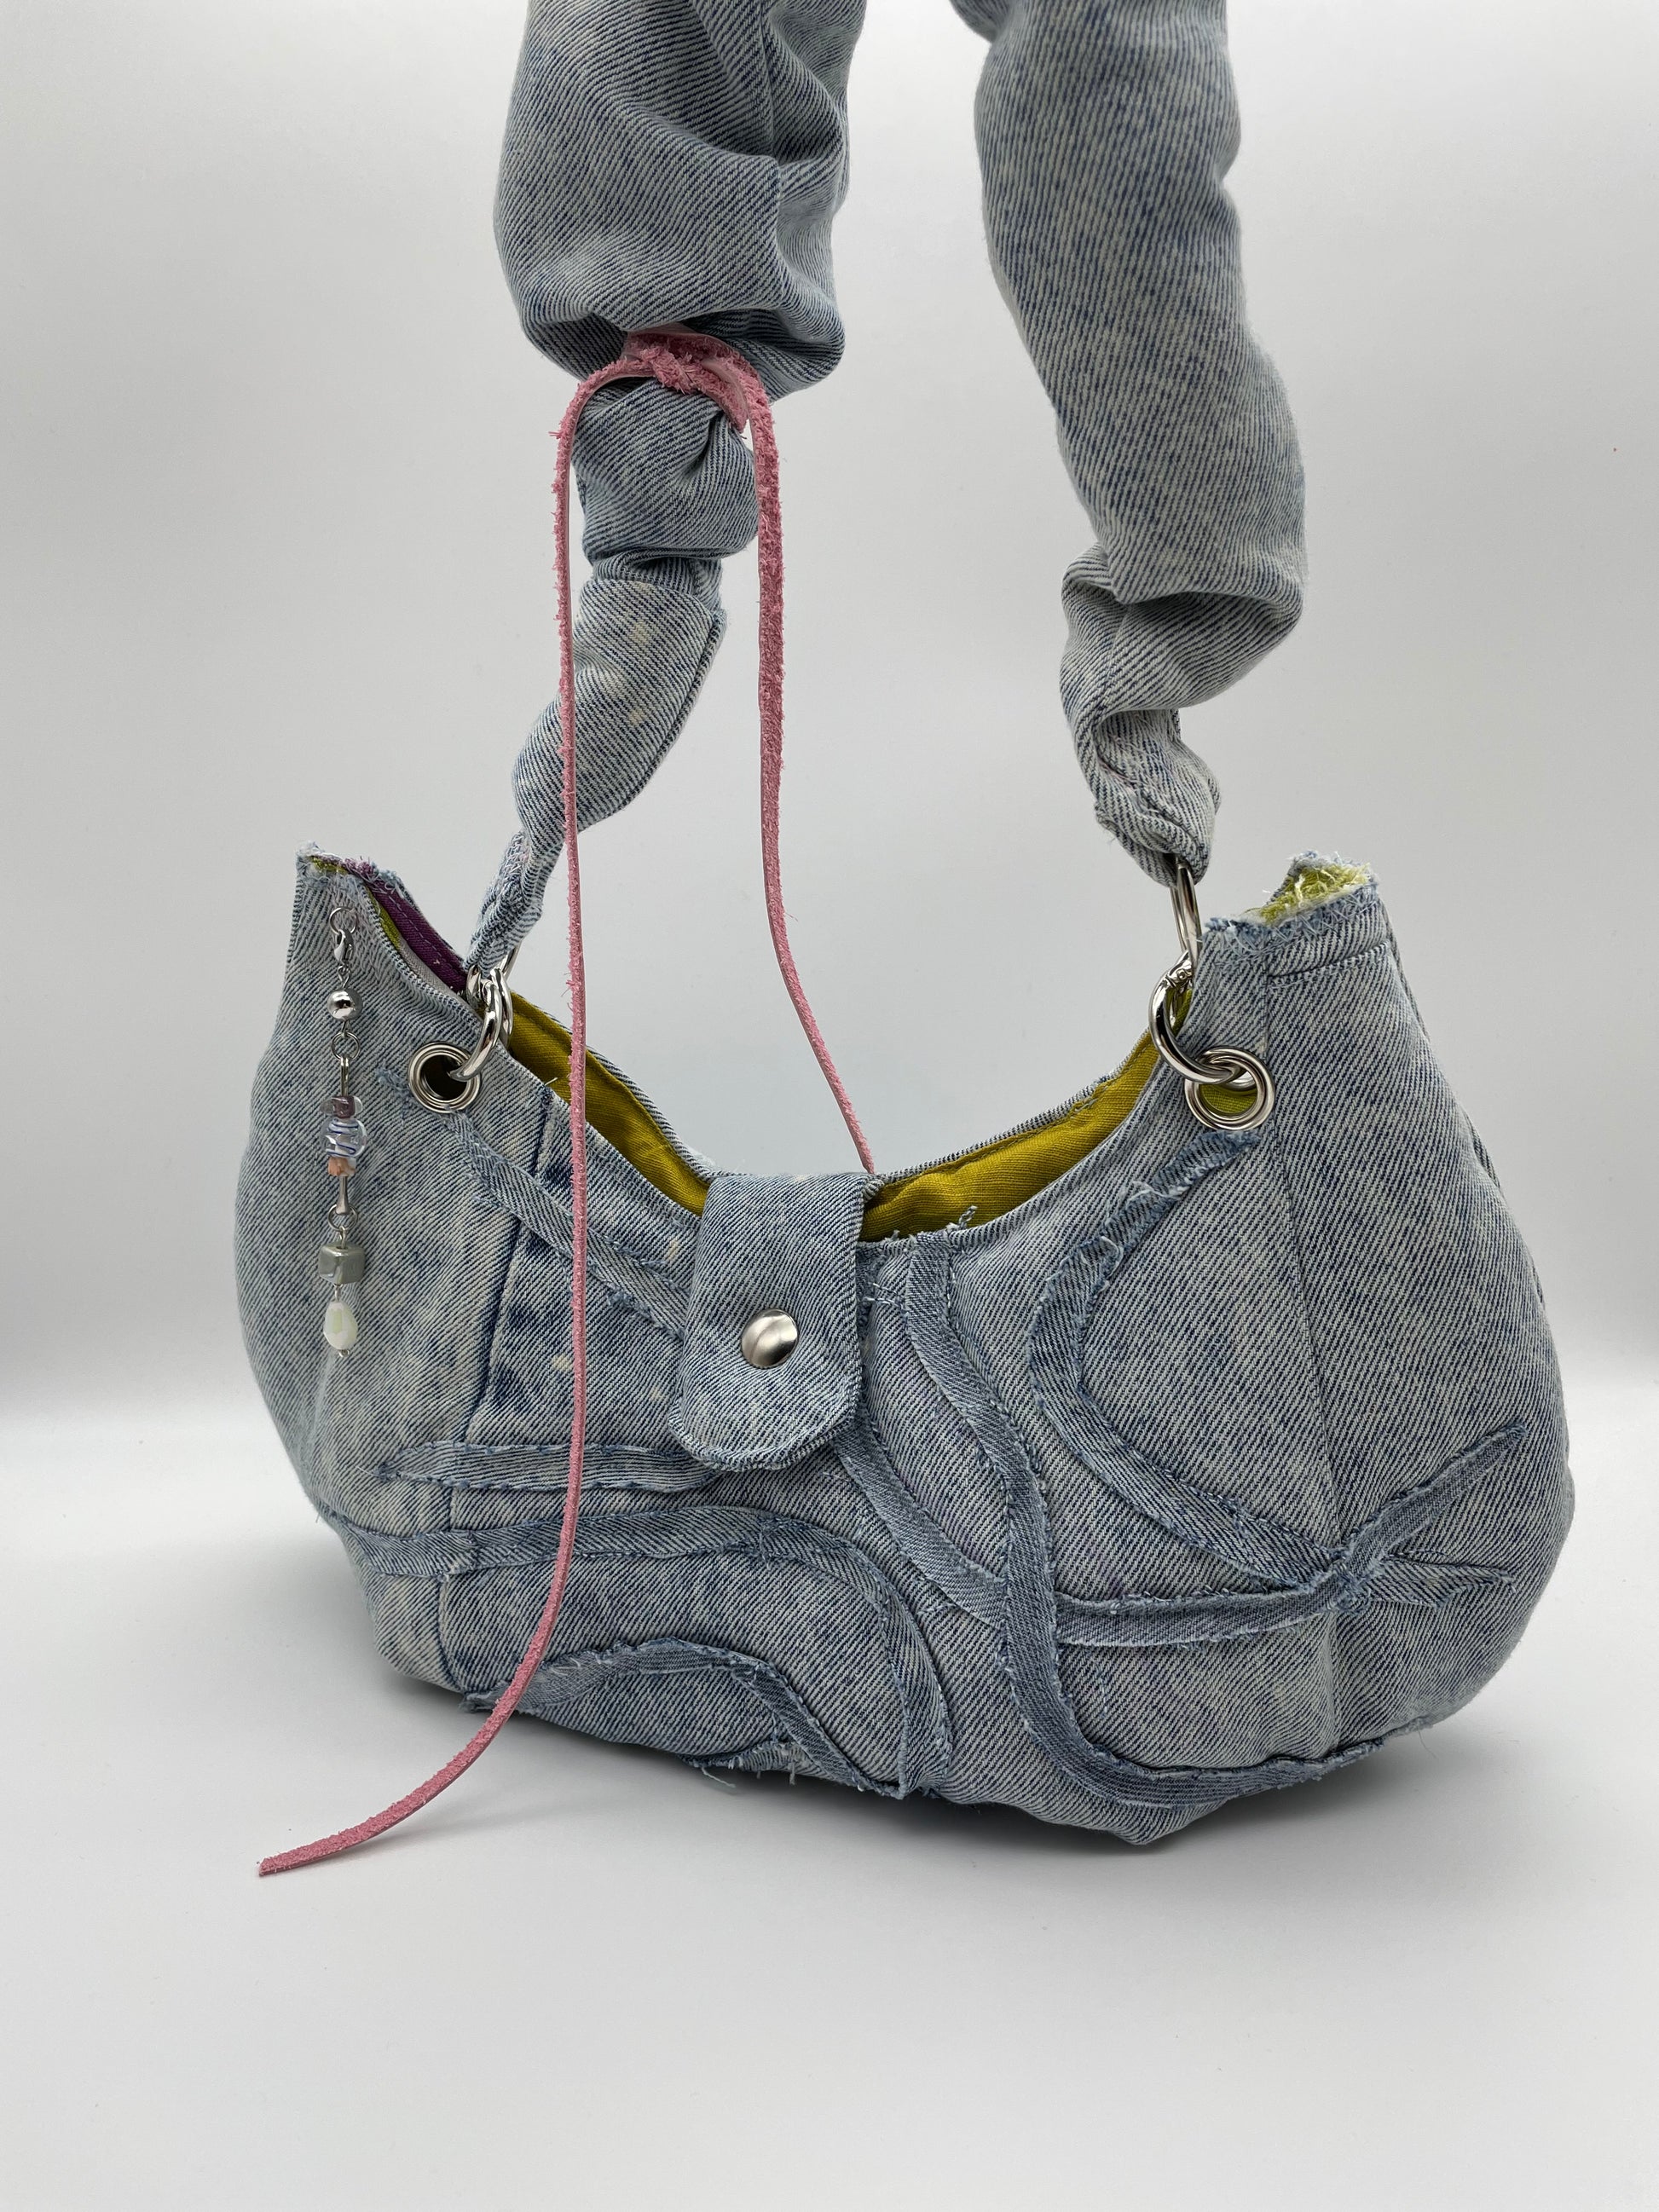 Upcycled bag washed out denim bag beads chain jeans bag scrunchy wavey padded batman